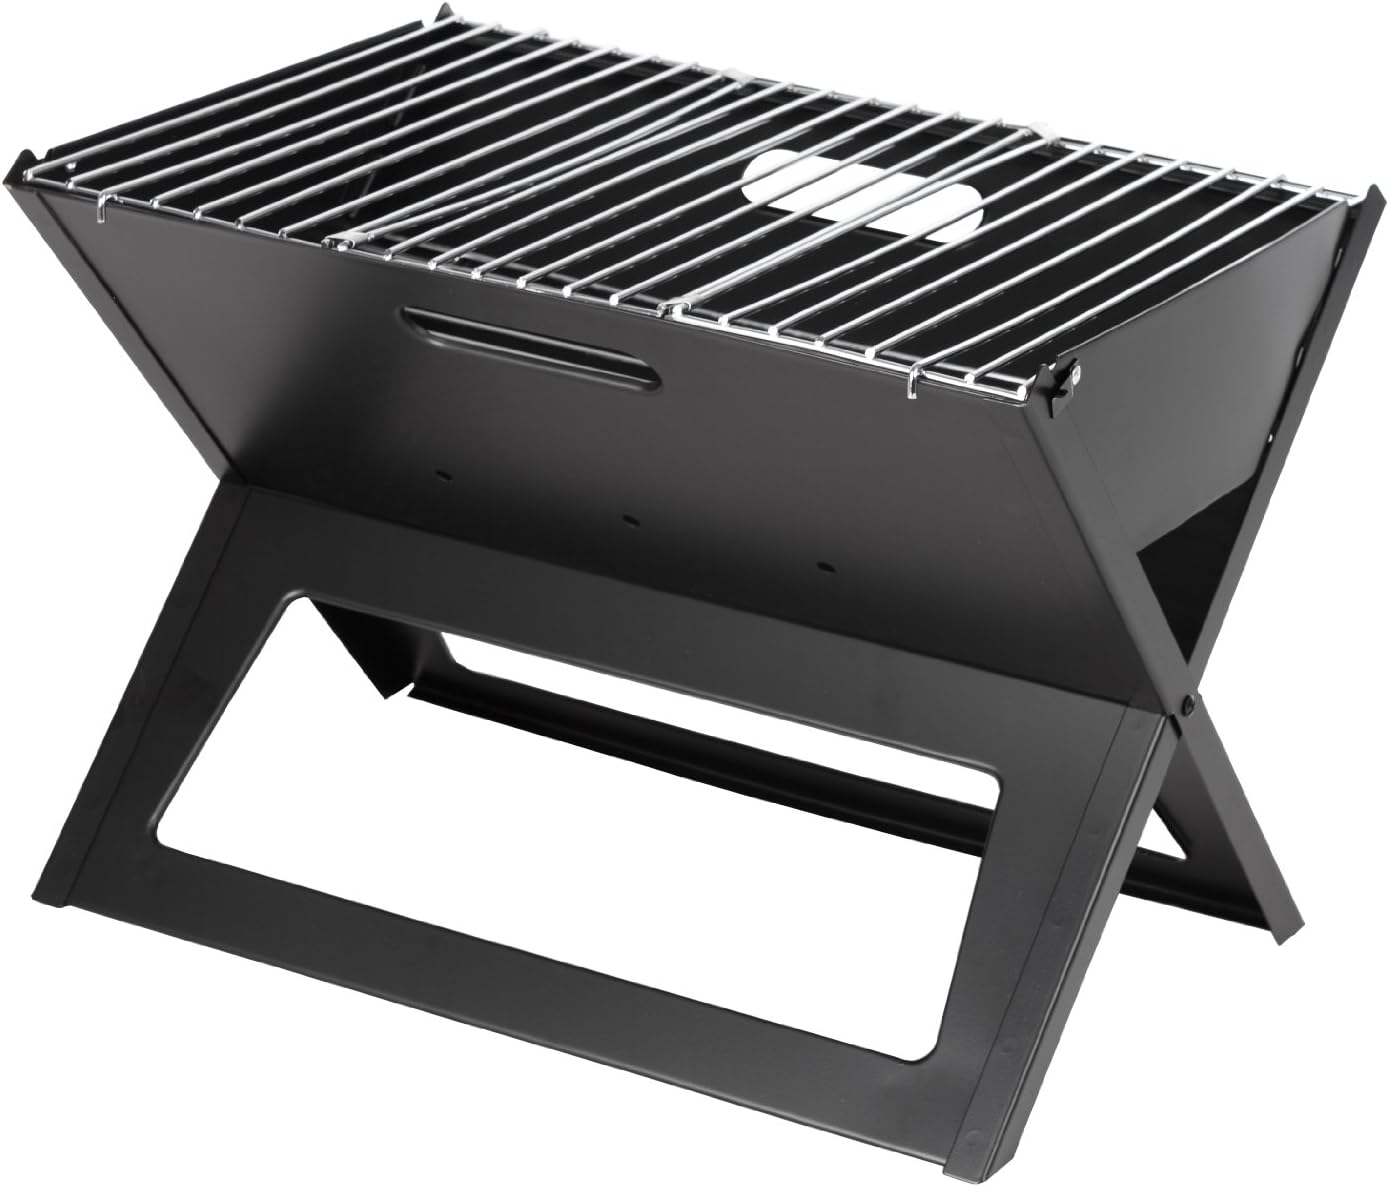 Camping Campfire Grill, Portable Folding Charcoal Grills, Backpacking BBQ Grill, Easy Portability For Outdoor Barbecues Camping Traveling Picnics Garden Beach Party